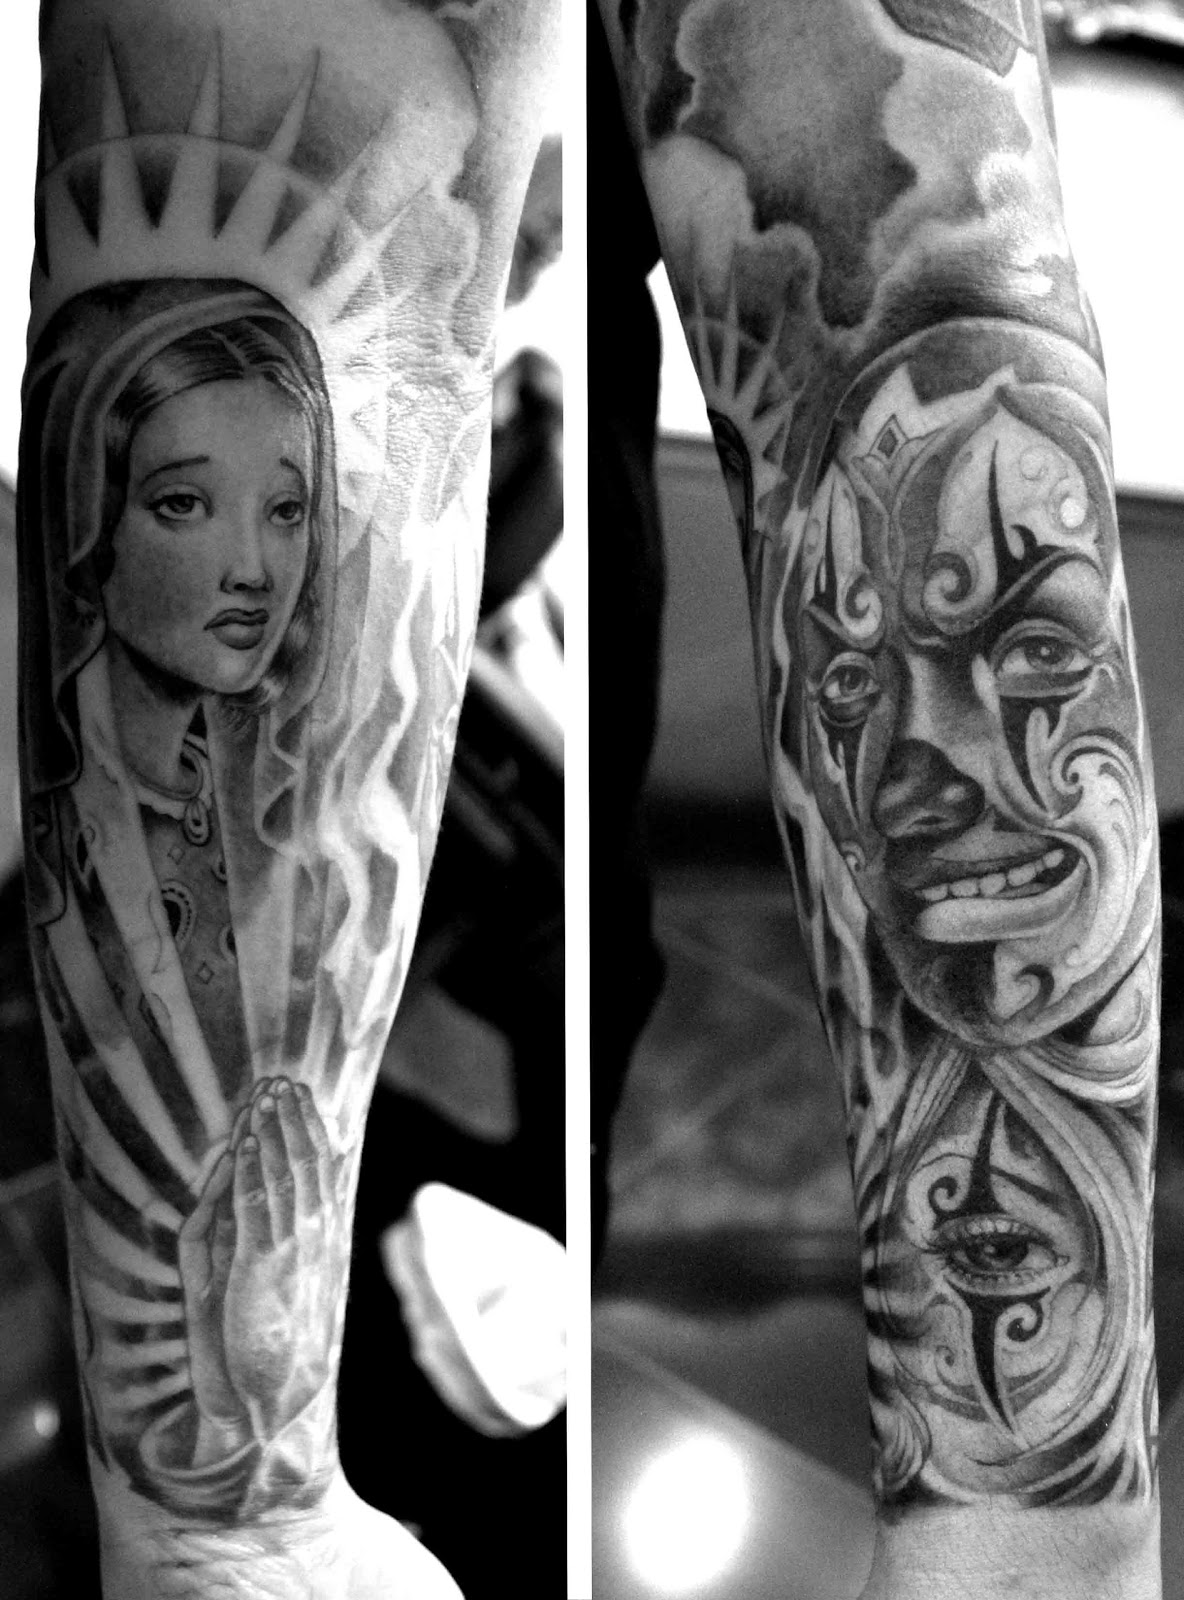 Amazing Pictures Must Seen: Mr Cartoon Tattoos